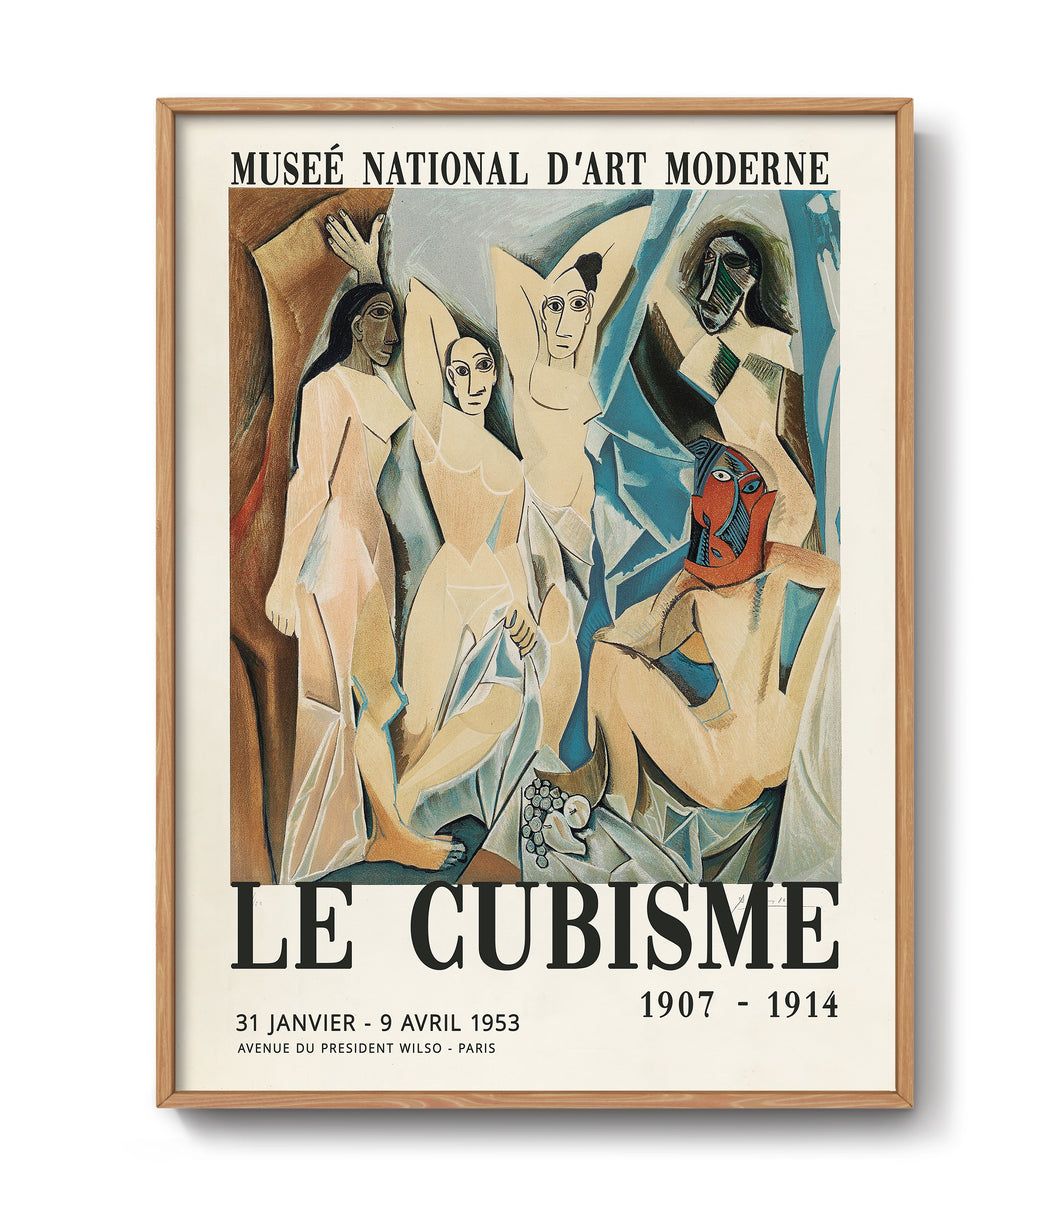 Exhibition poster by Picasso